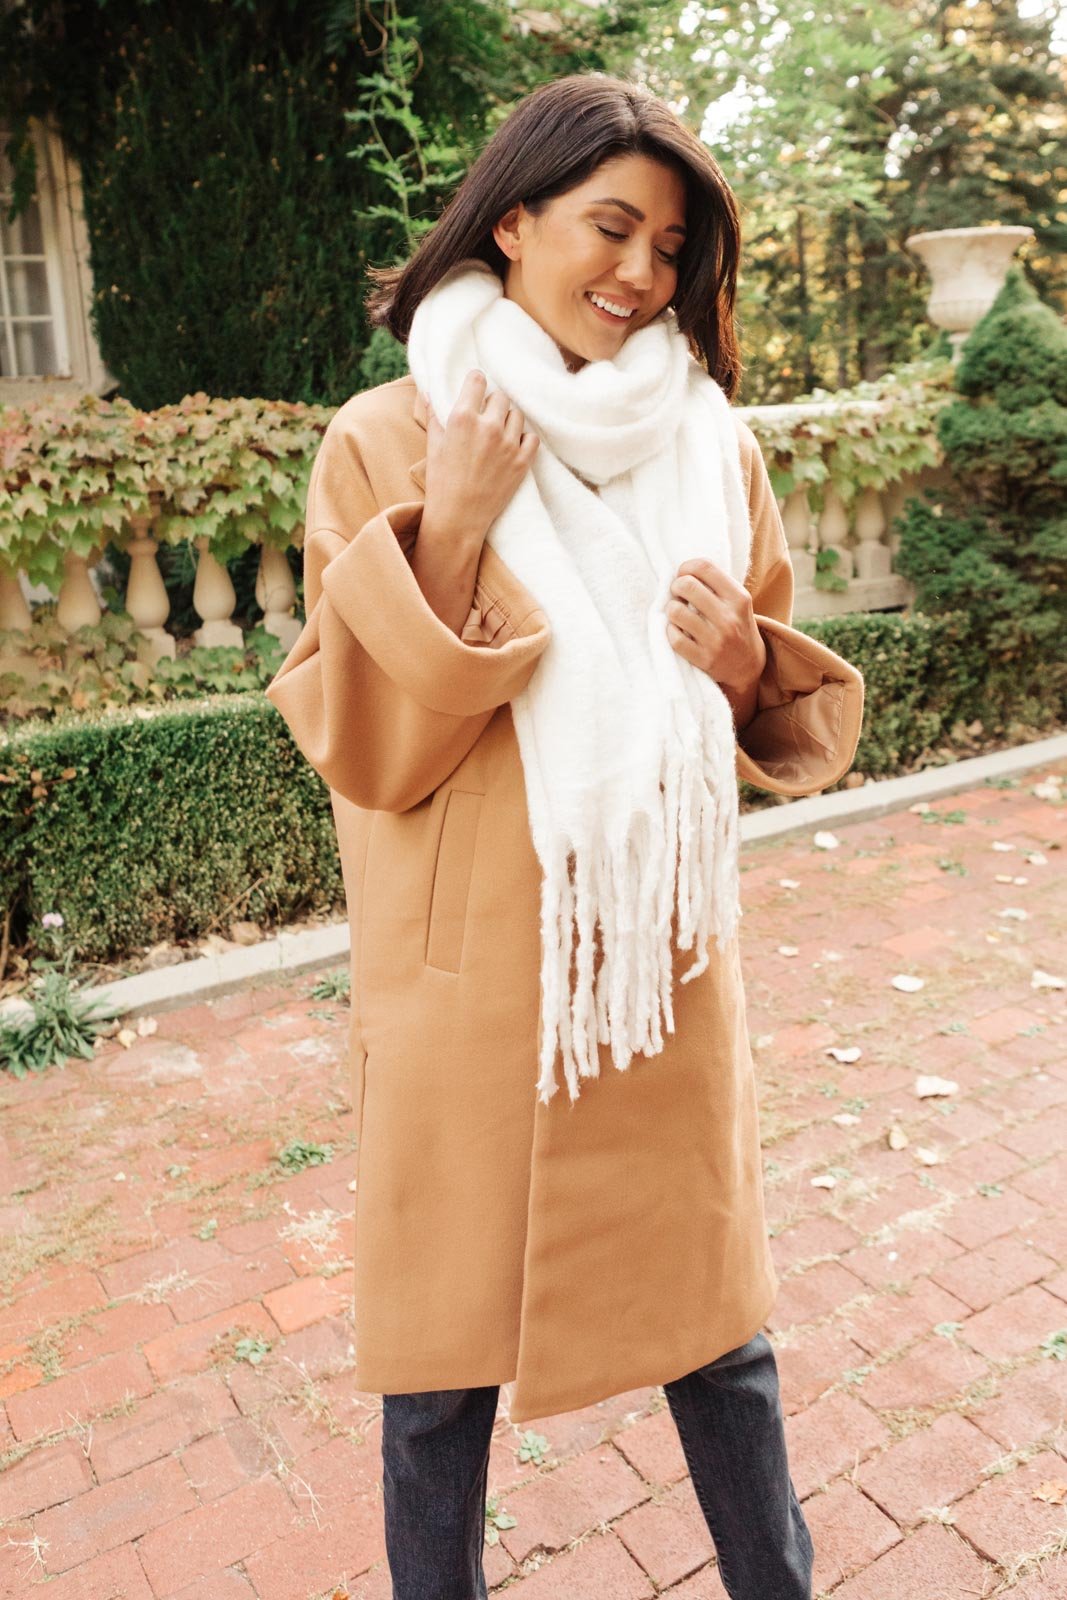 Deconstructed Oversized Trench Coat in Light Tan